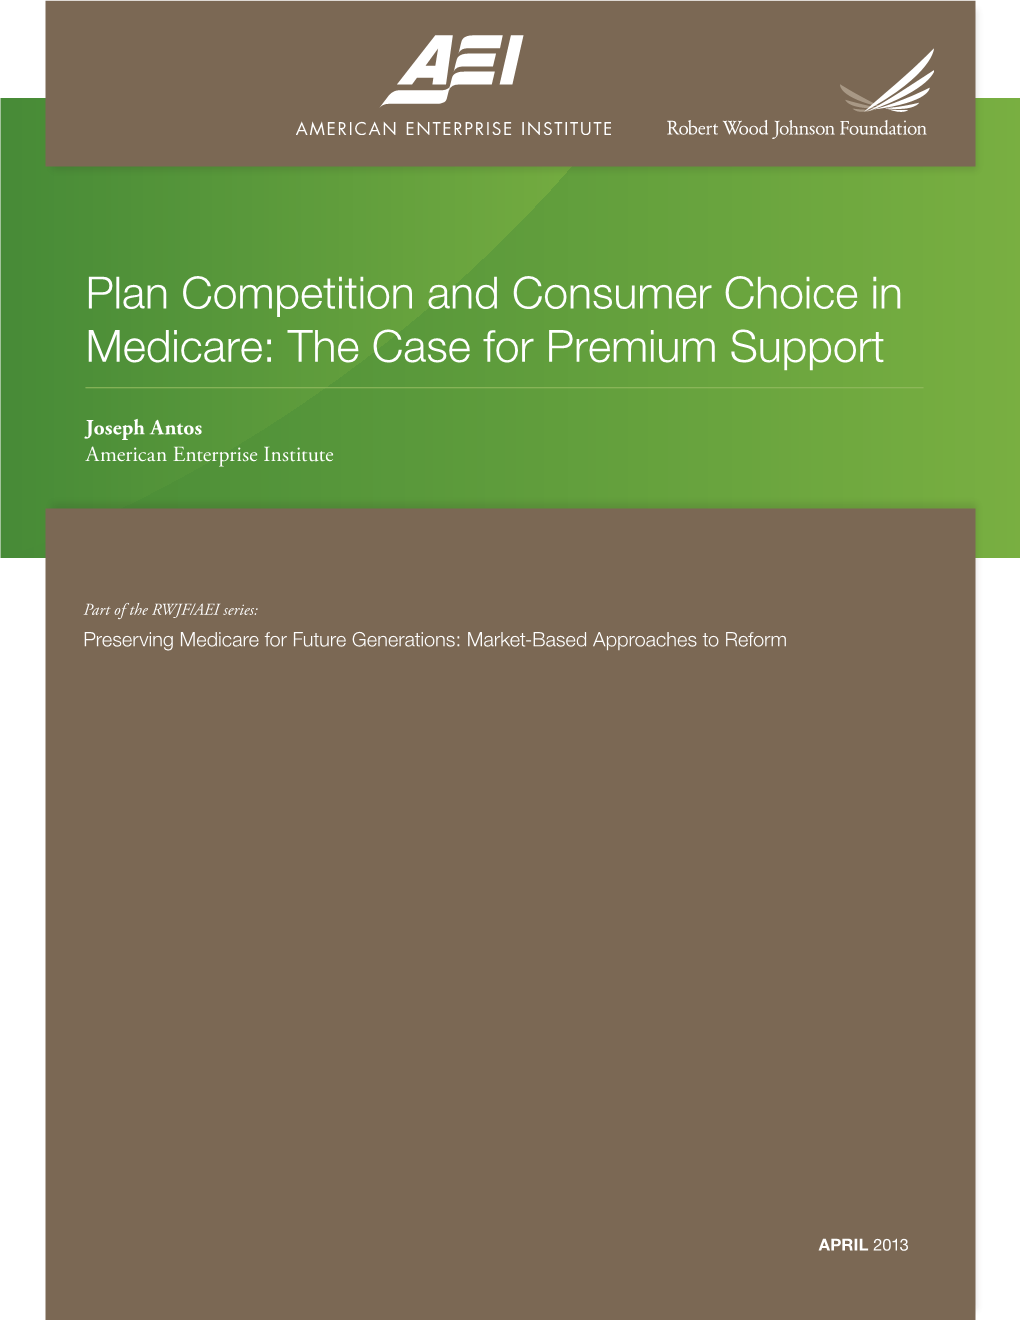 Plan Competition and Consumer Choice in Medicare: the Case for Premium Support